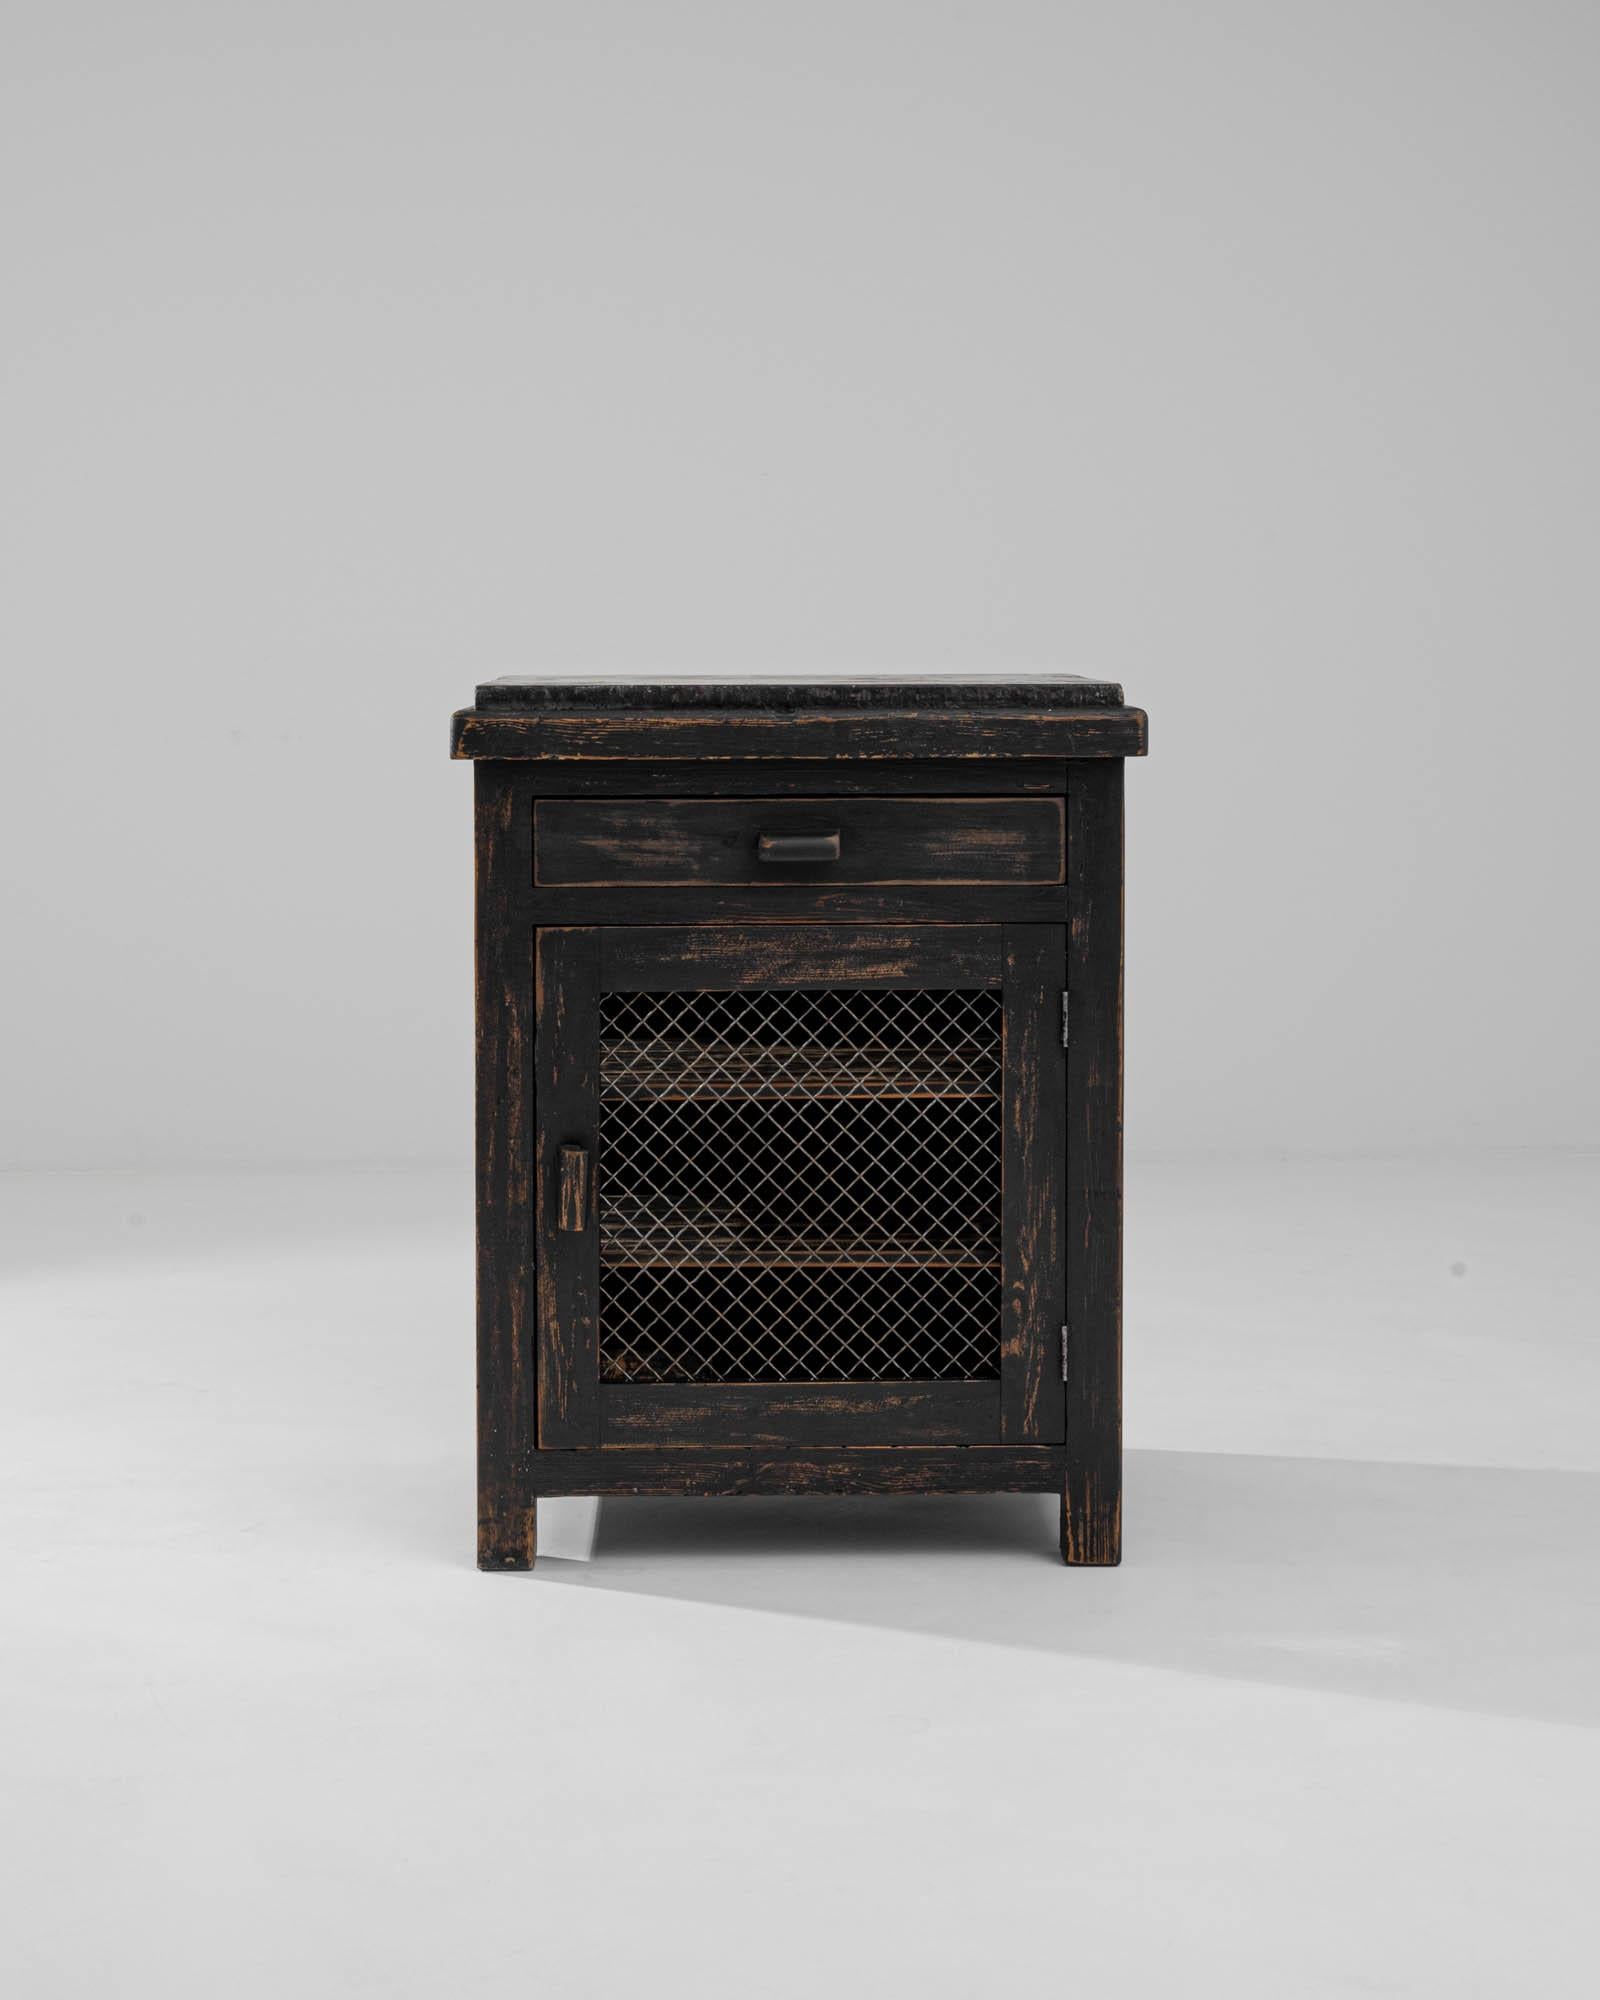 A black stone tabletop adds an elegant crowning touch to this vintage Provincial cabinet. Built in France in the early 20th century, this piece would have originally been used as a larder; the metal mesh of the door and sides would have allowed air